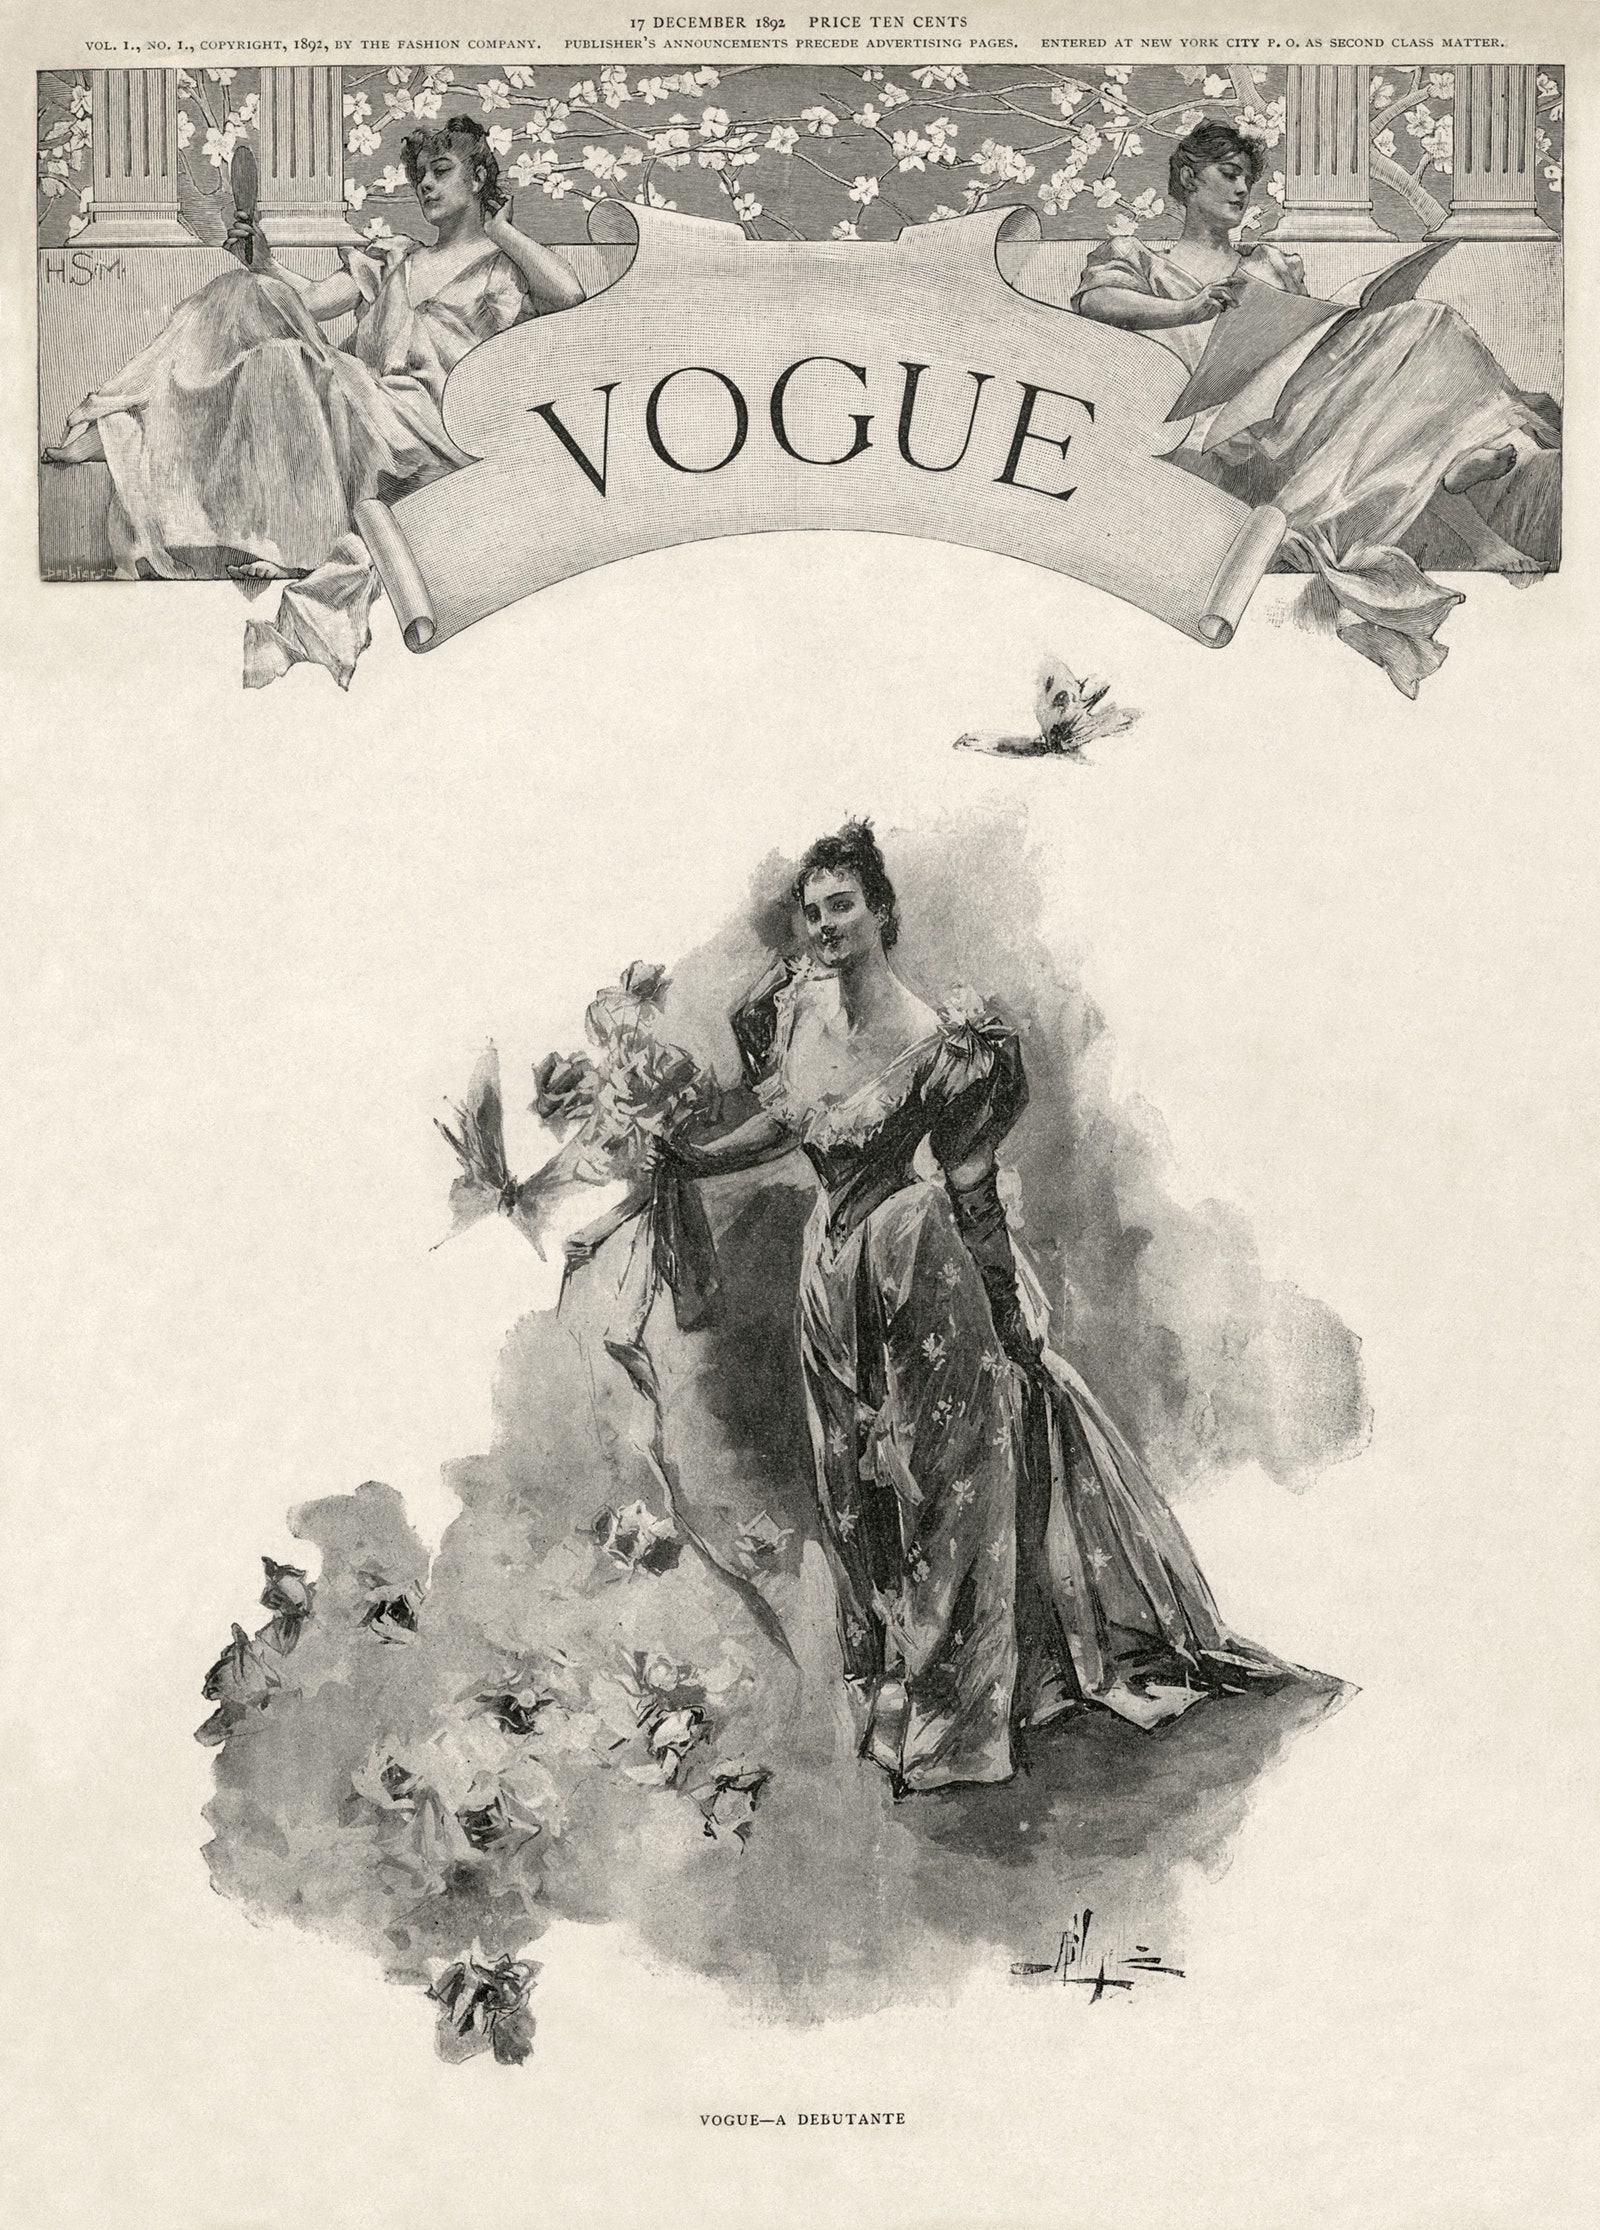 Vogue's fashion encyclopaedia: Everything you need to know about